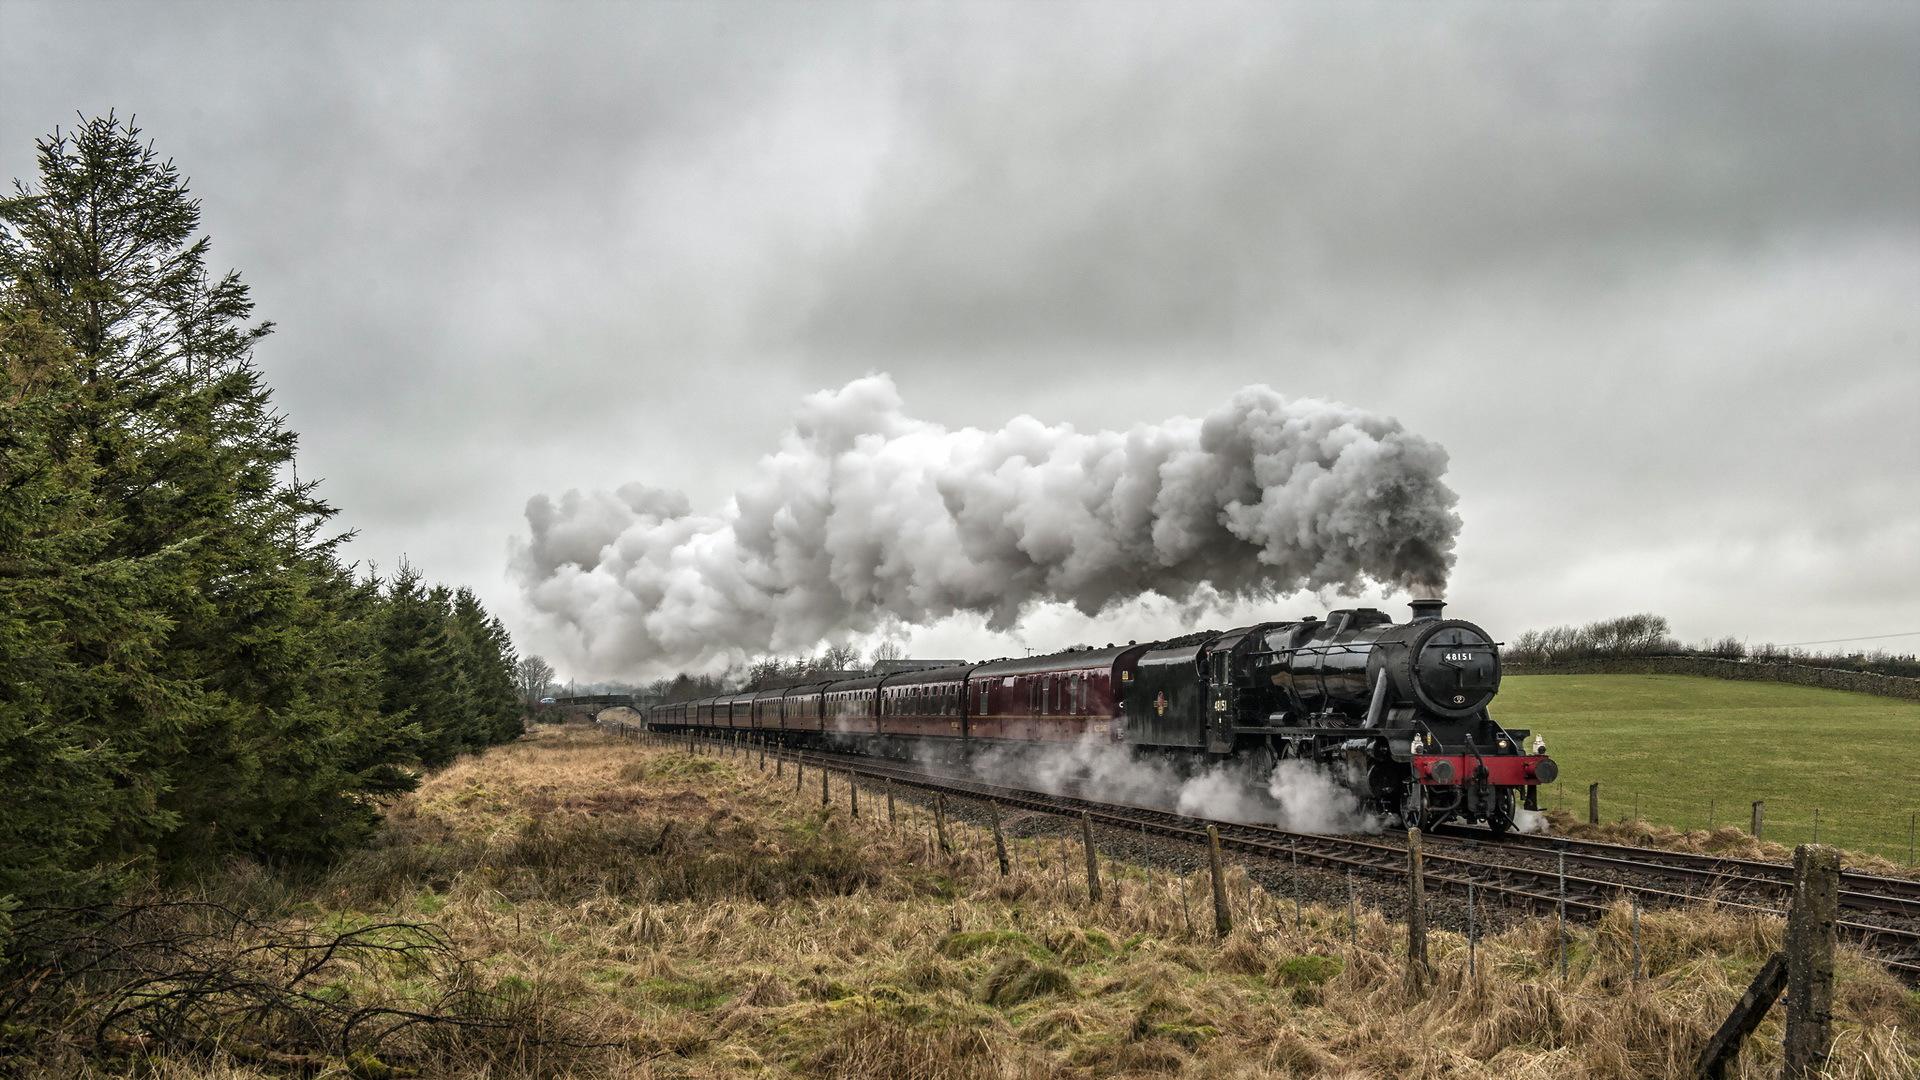 Gorgeous steam train rolling through the countryside -